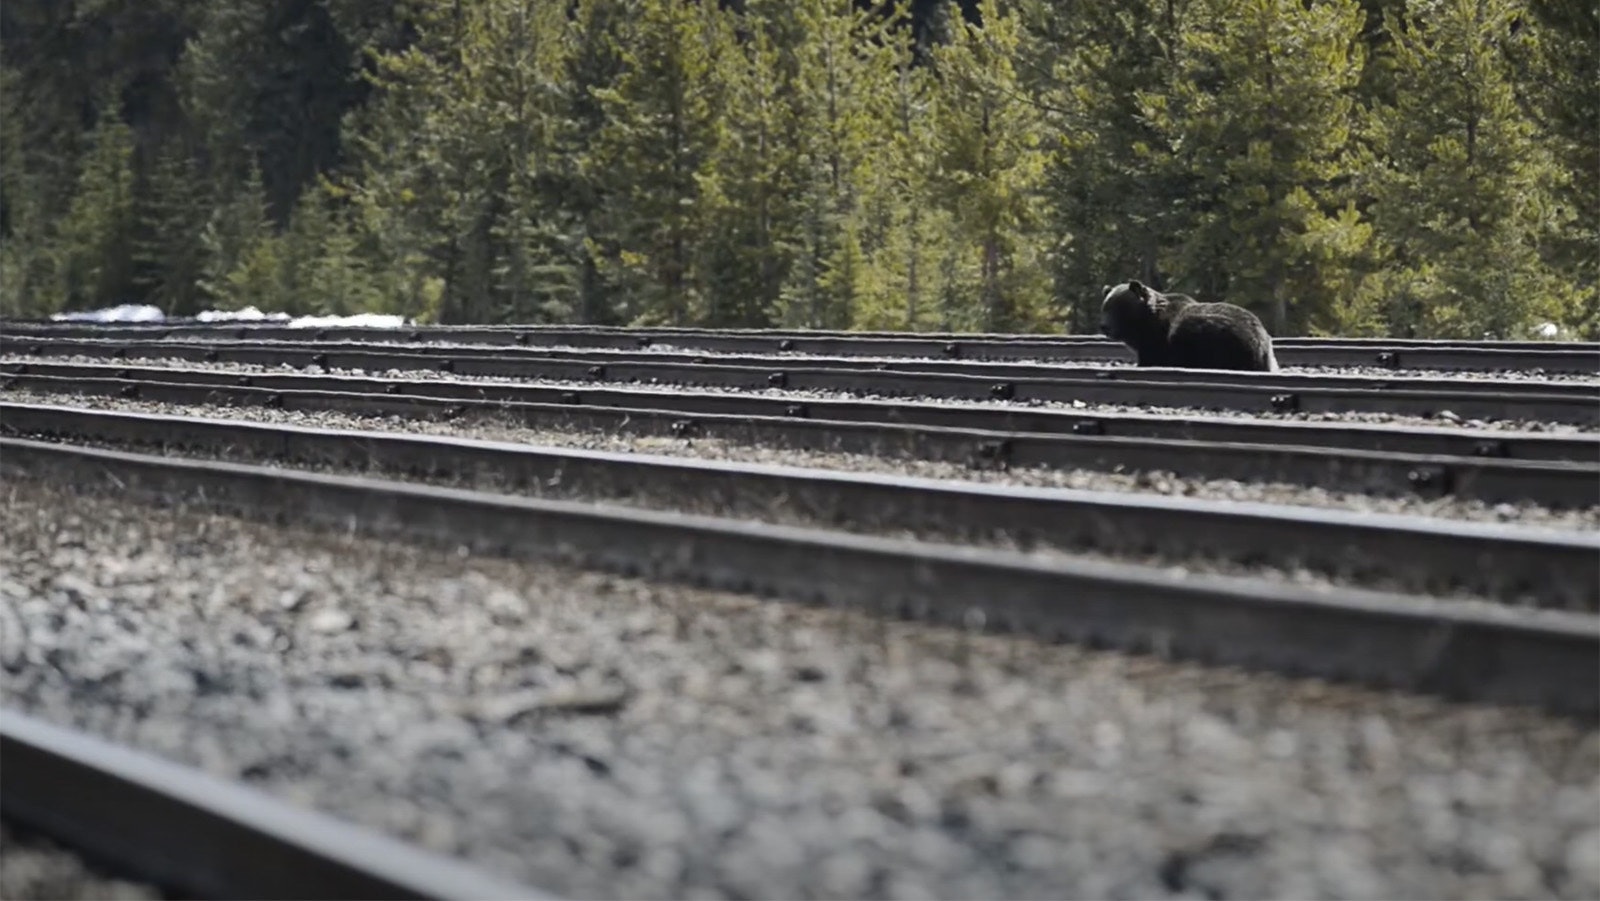 A grizzly bear feeds on grain that has spilled along railroad tracks.